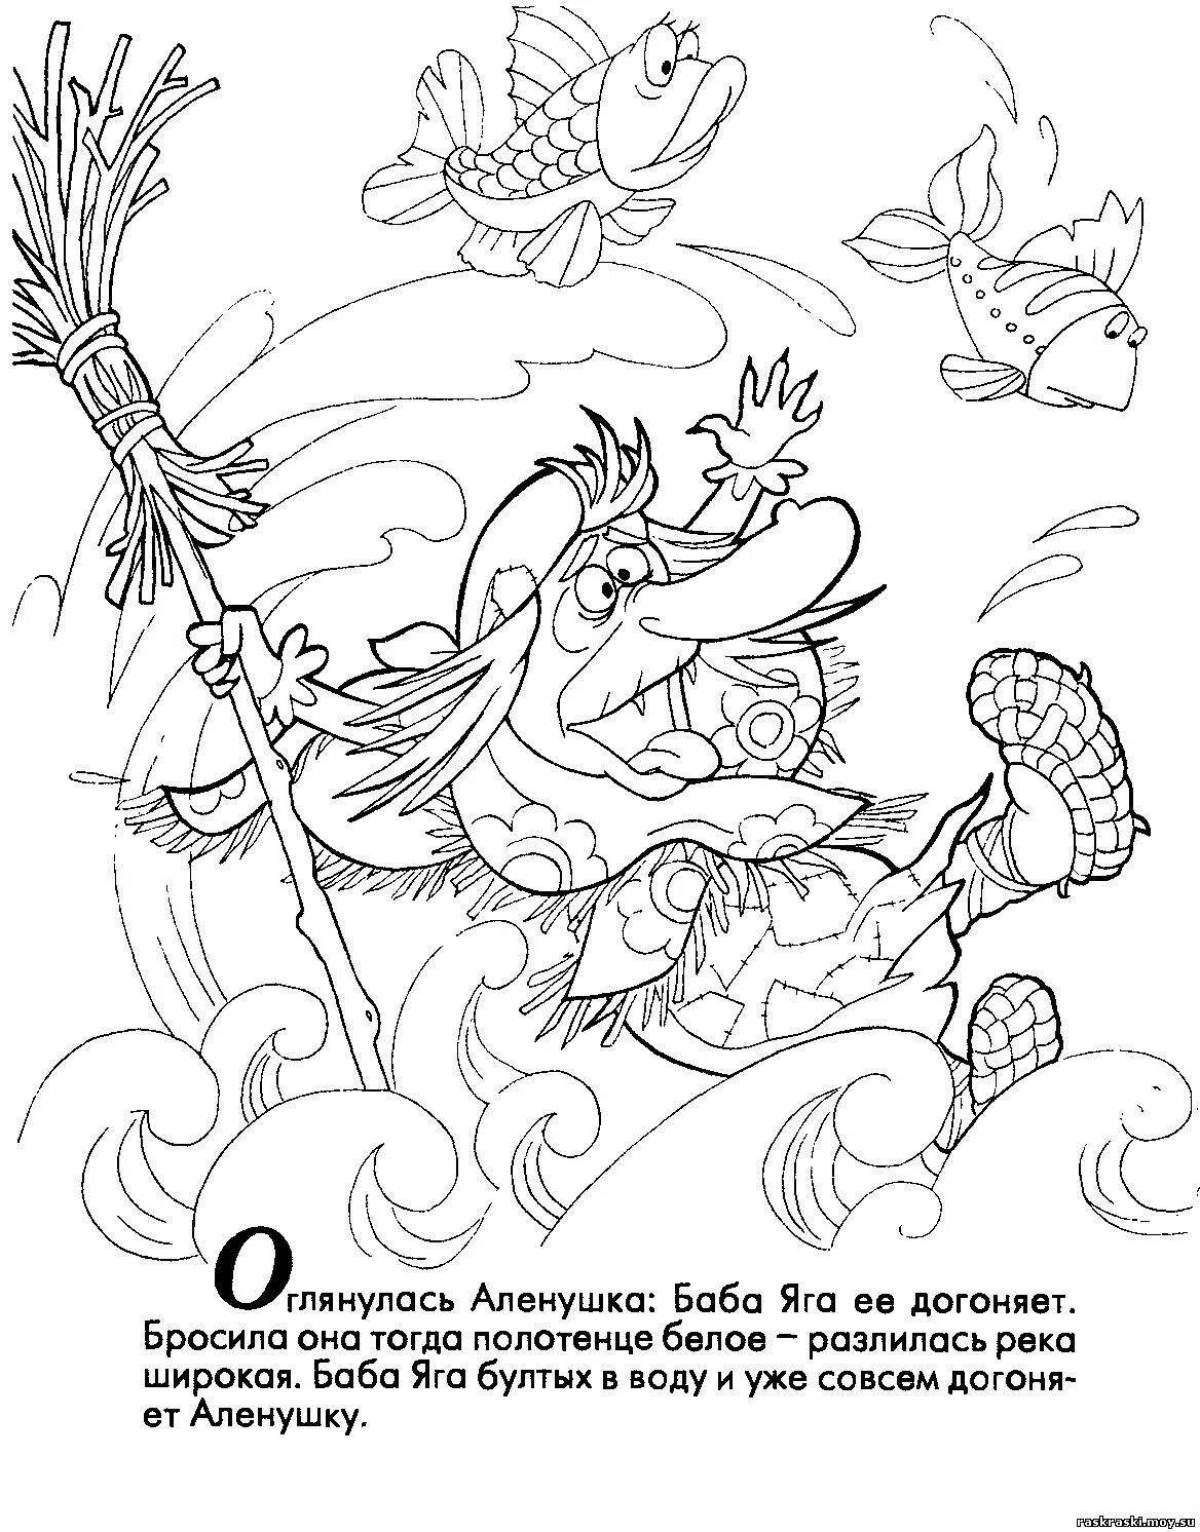 Charming coloring book based on Pushkin's fairy tales for children 5-6 years old